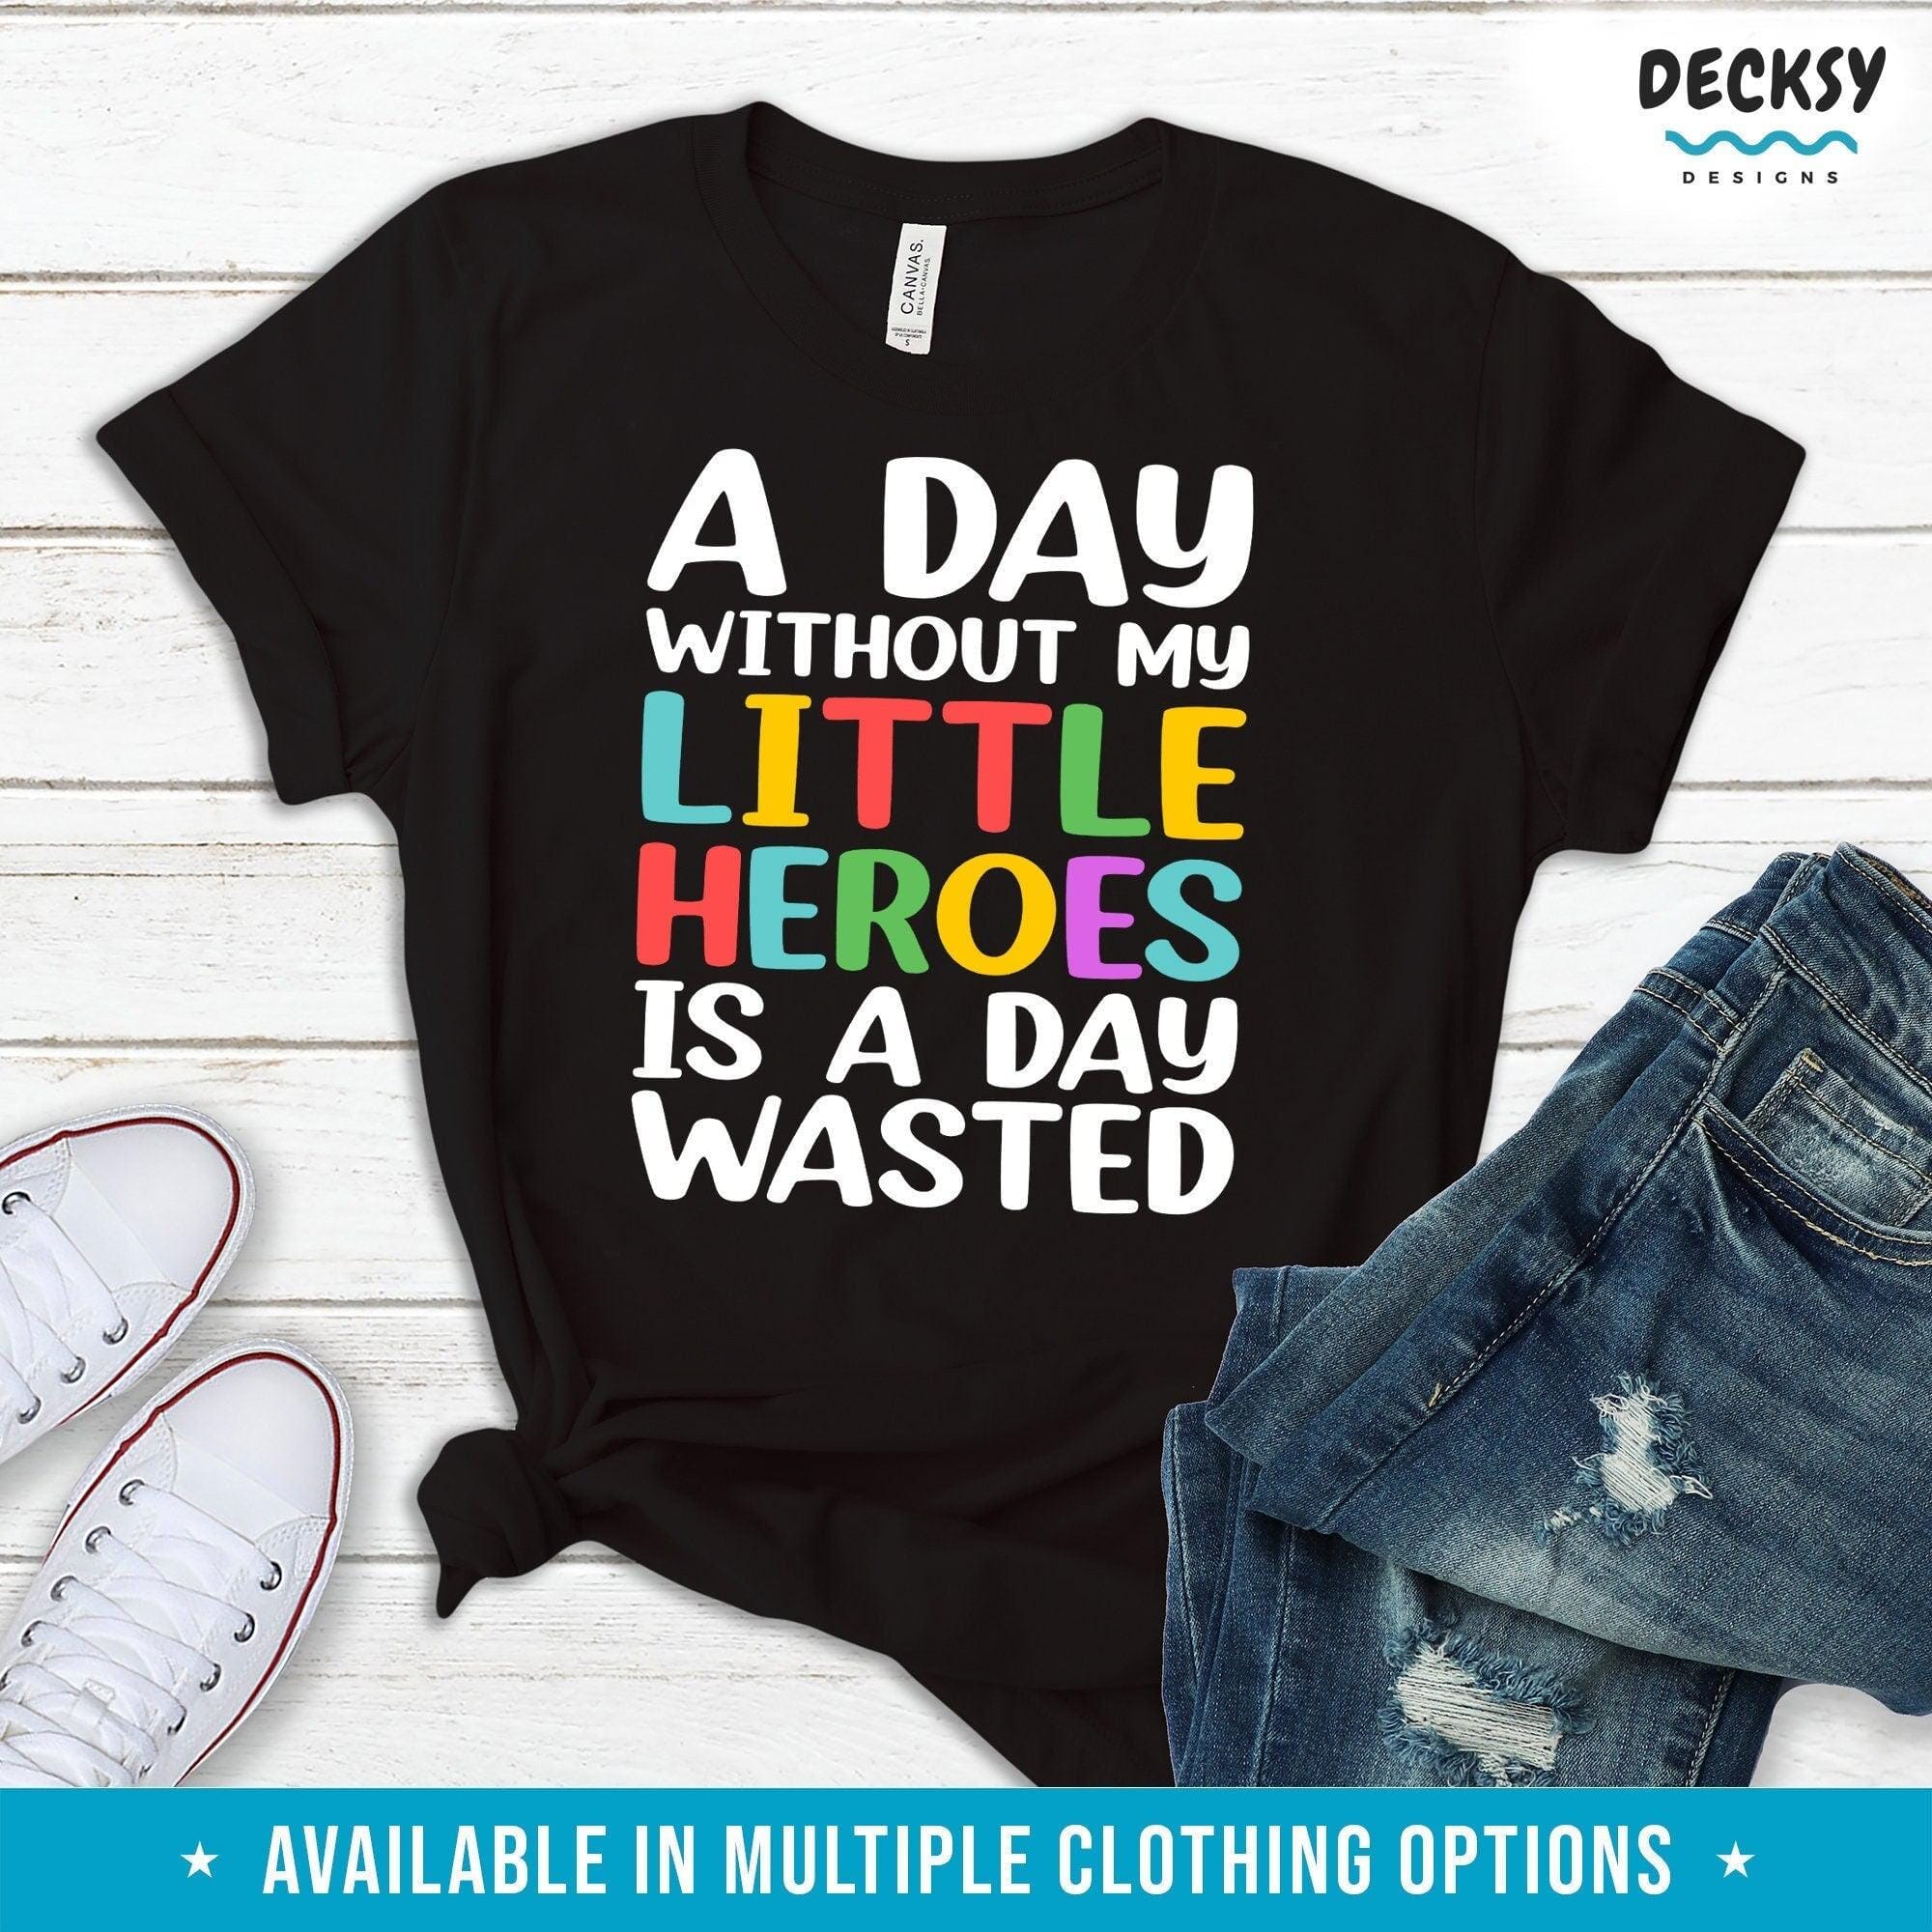 Teacher Shirtr, Childcare Educator Gift-Clothing:Gender-Neutral Adult Clothing:Tops & Tees:T-shirts:Graphic Tees-DecksyDesigns